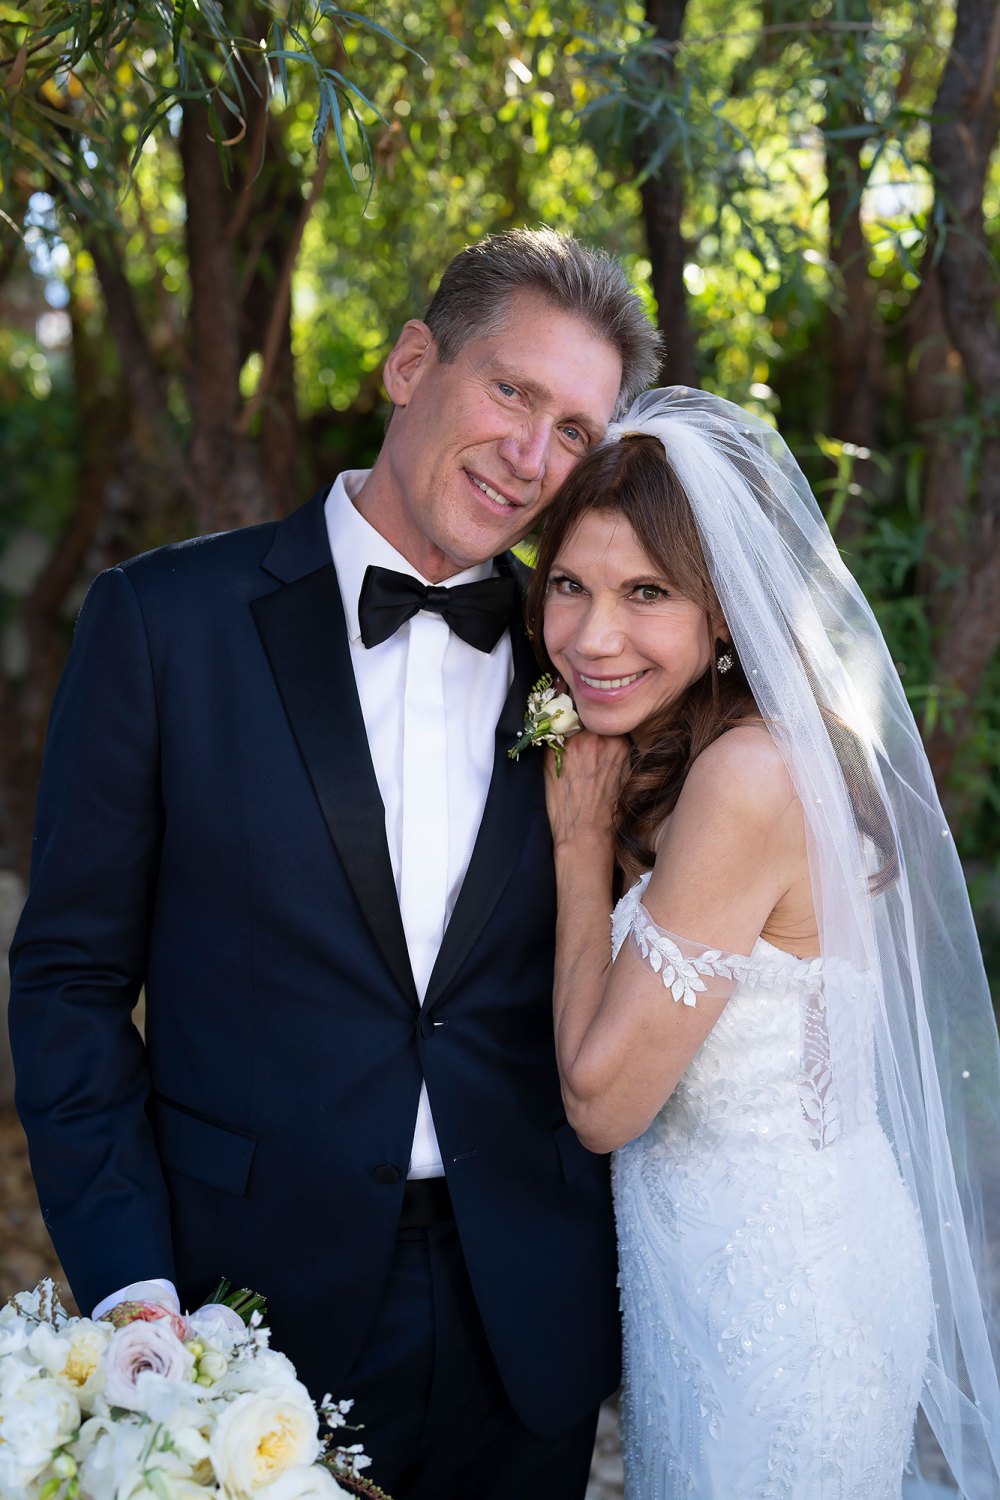 Bachelor Bob Guiney Speculates Gerry Turner and Theresa Nist Marriage Was Fundamentally Flawed